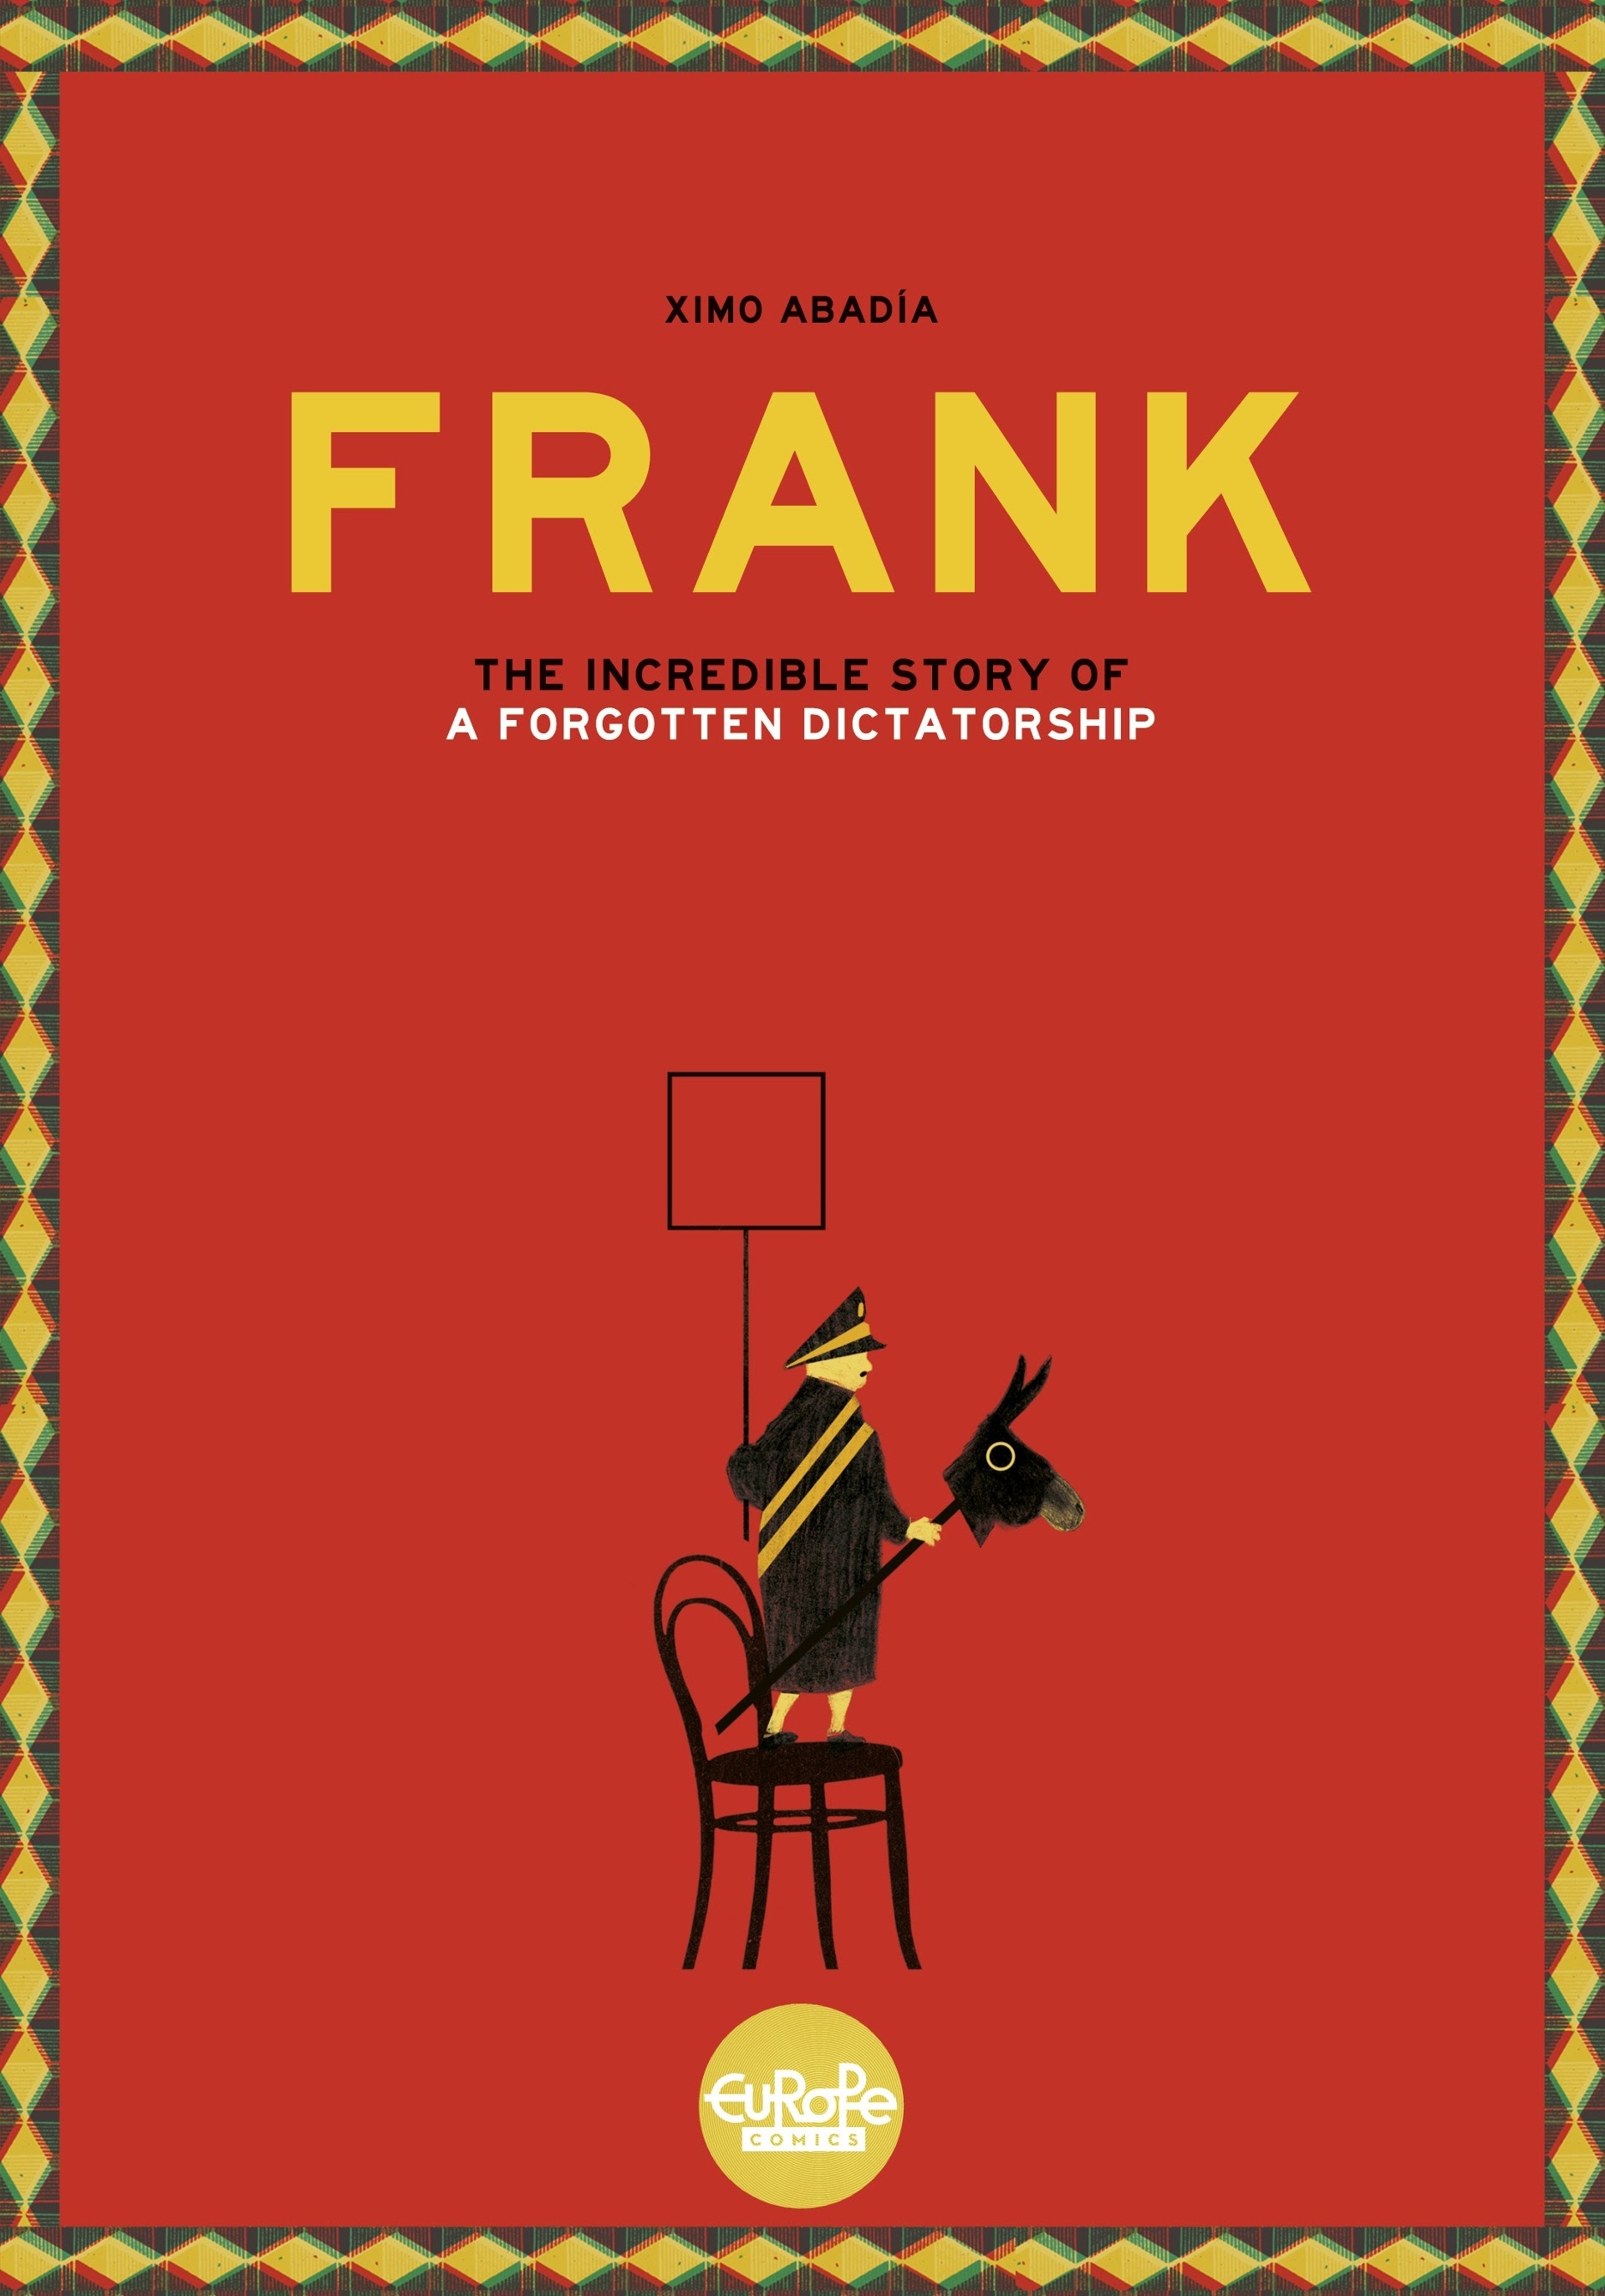 Read online Frank: The Incredible Story of A Forgotten Dictatorship comic -  Issue # Full - 1